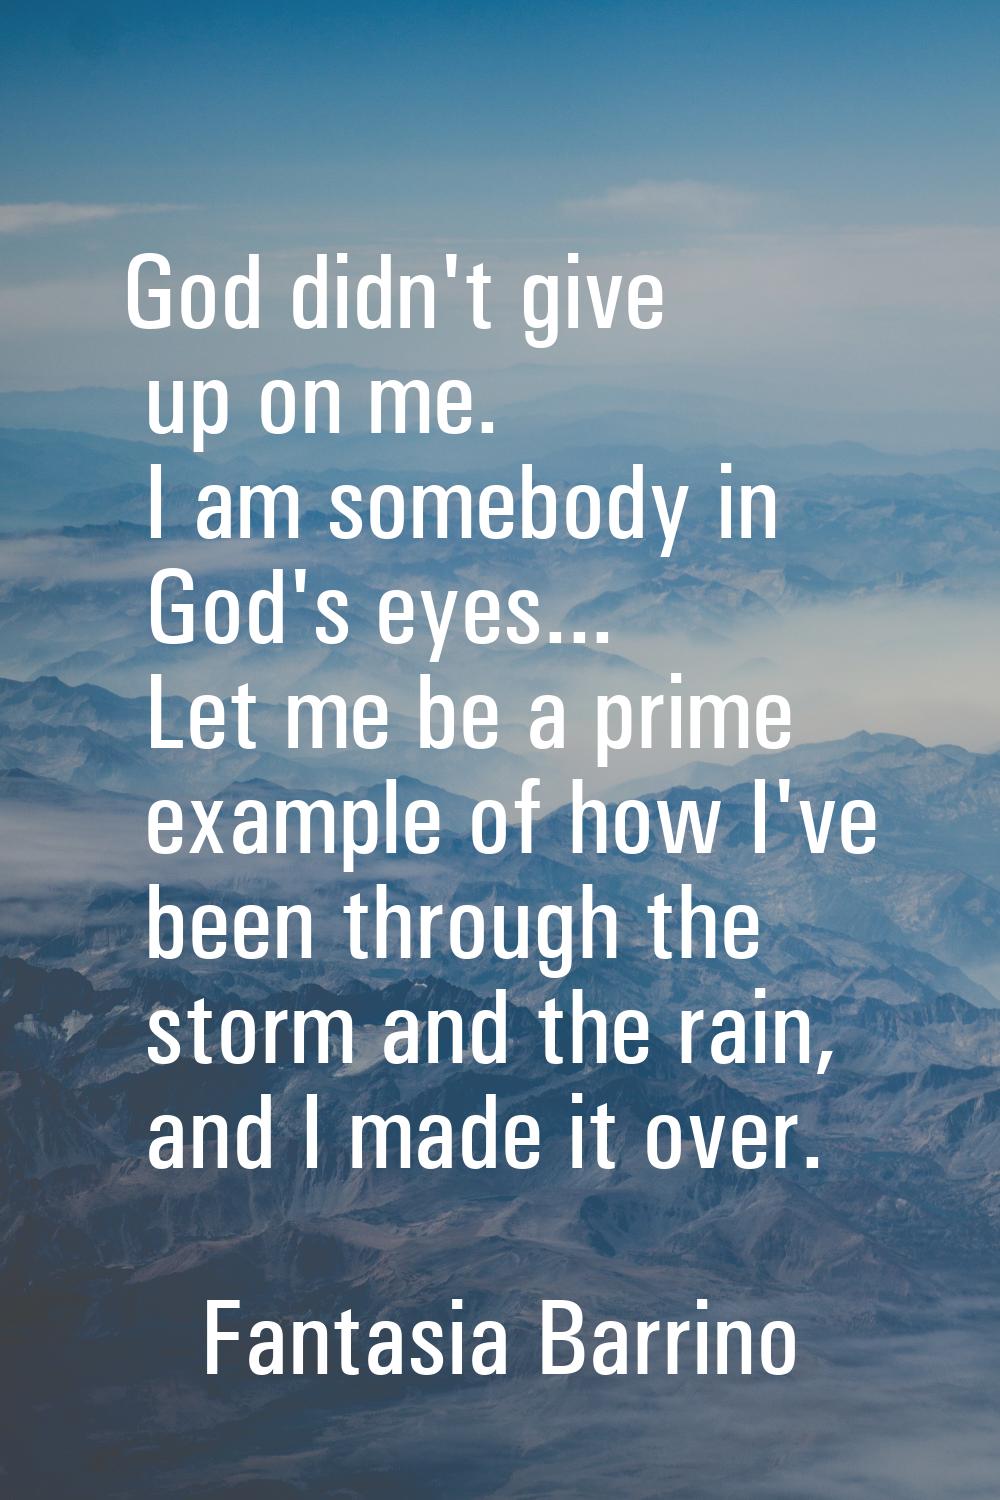 God didn't give up on me. I am somebody in God's eyes... Let me be a prime example of how I've been